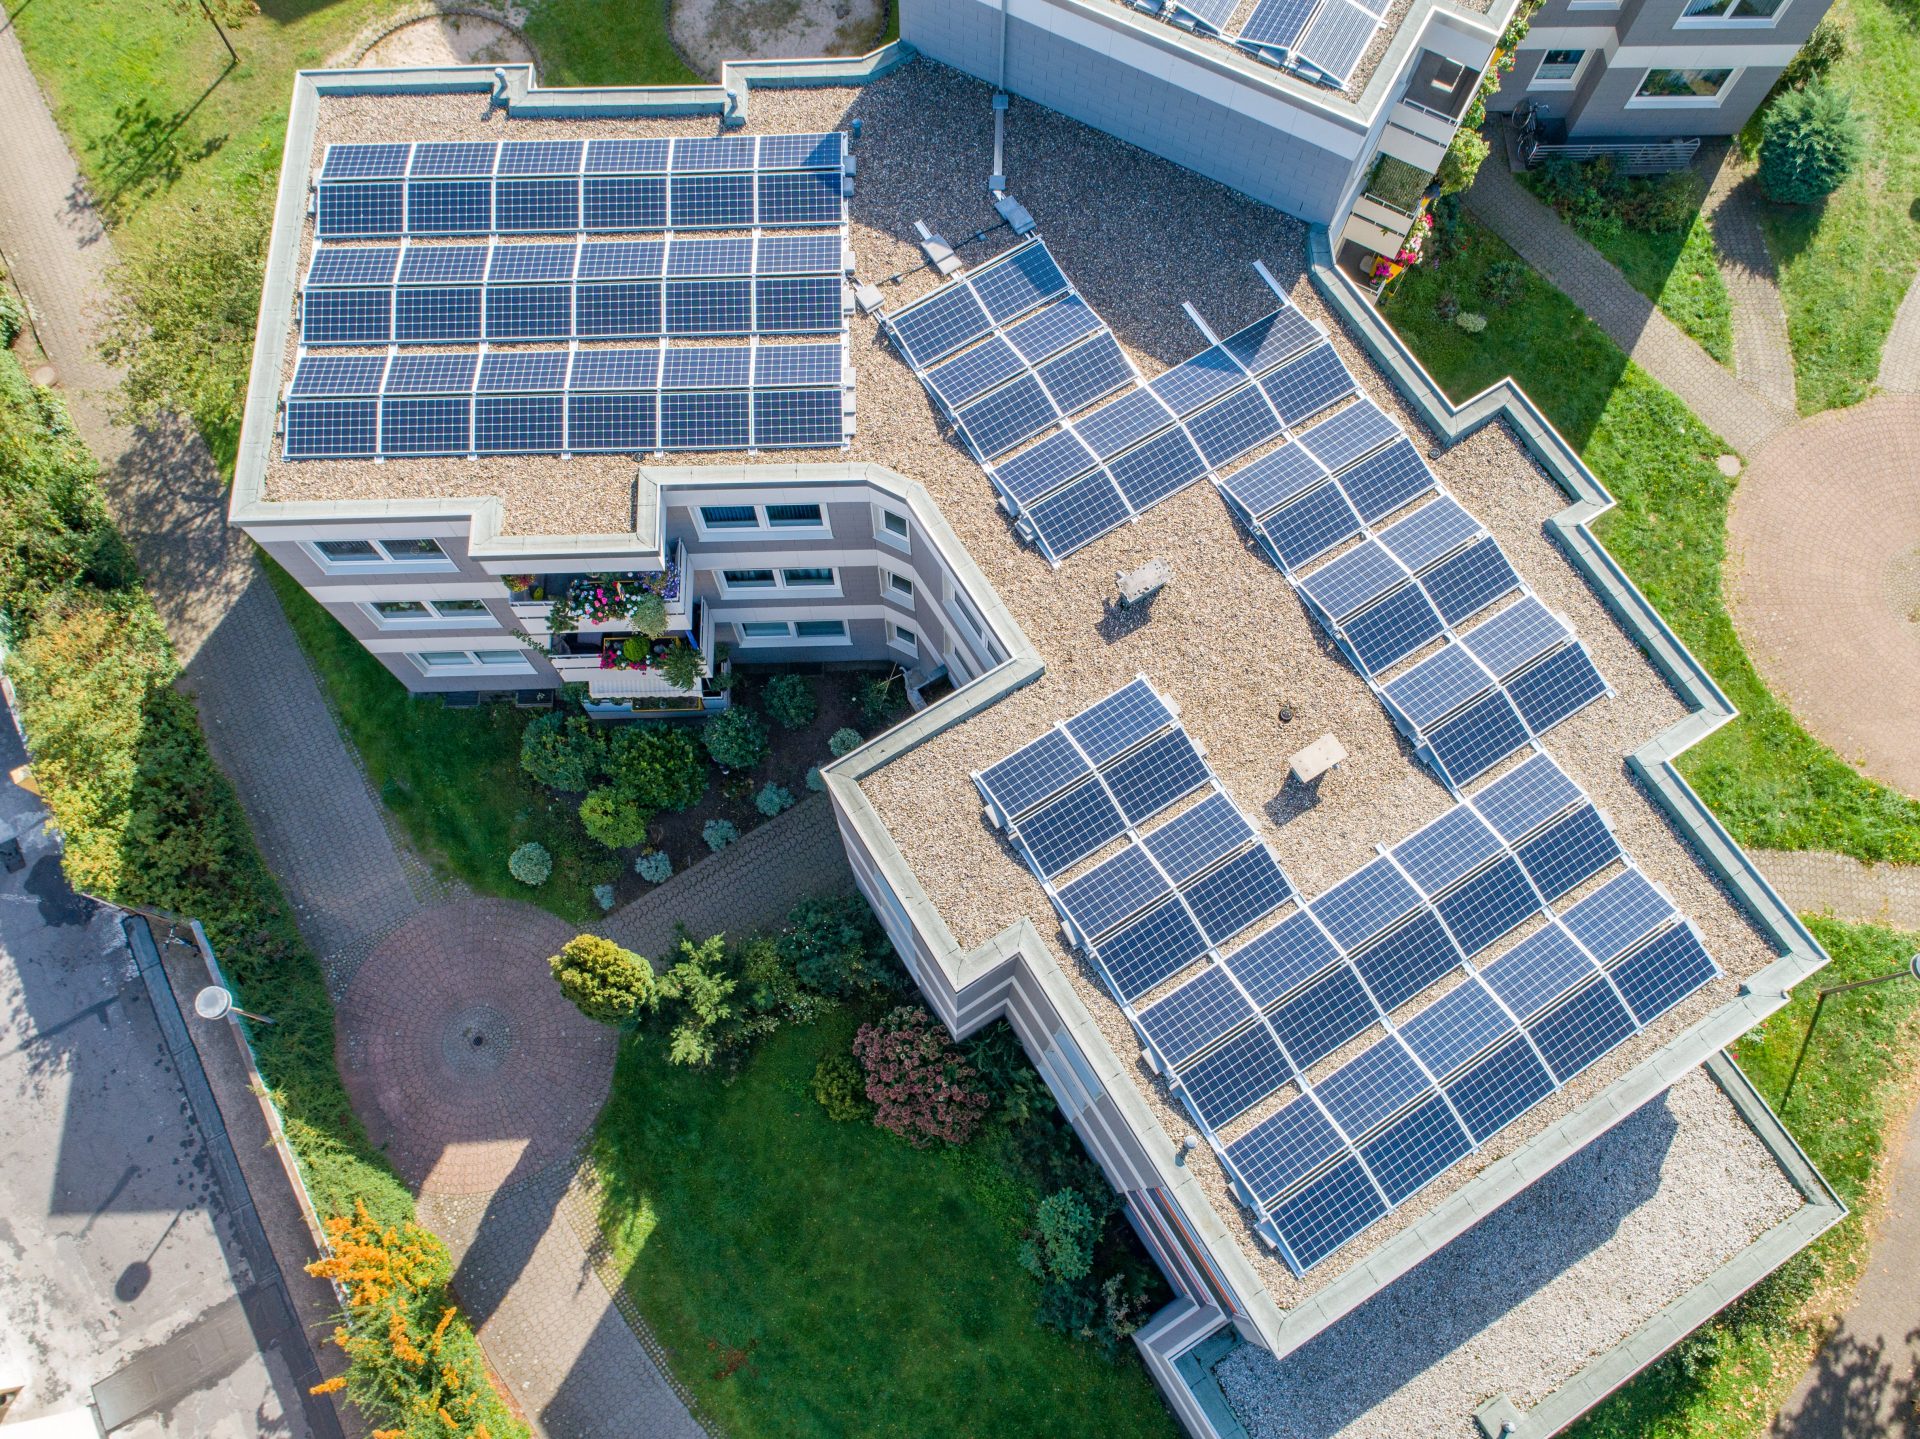 Solar panels on the roof of an apartment building, taken from the air.